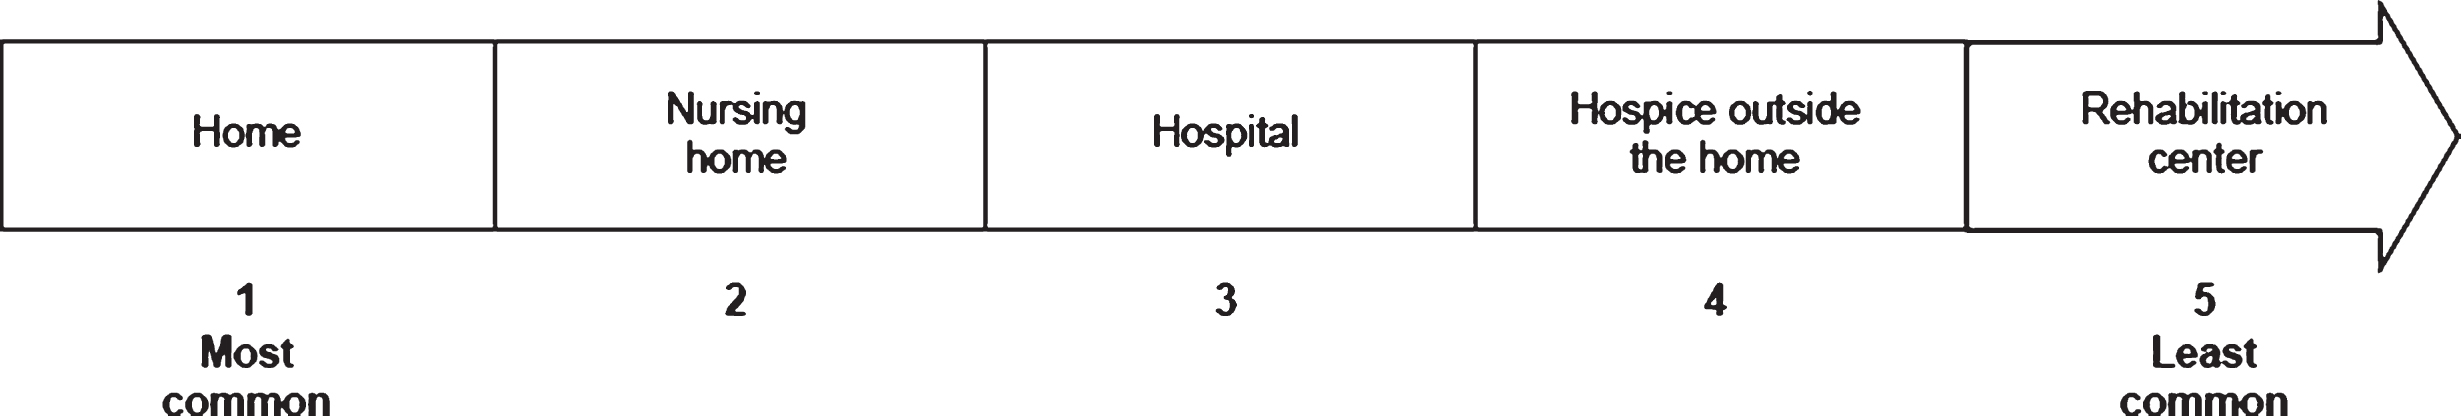 Ranked end-of-life settings for patients with sIBM, based on the experience of 13 physicians from seven countries. Each physician was asked to score the end-of-life settings shown above (1 = most common, 5 = least common). Based on all the physicians’ responses, the mean score was calculated and used to rank the settings. sIBM, sporadic inclusion body myositis.